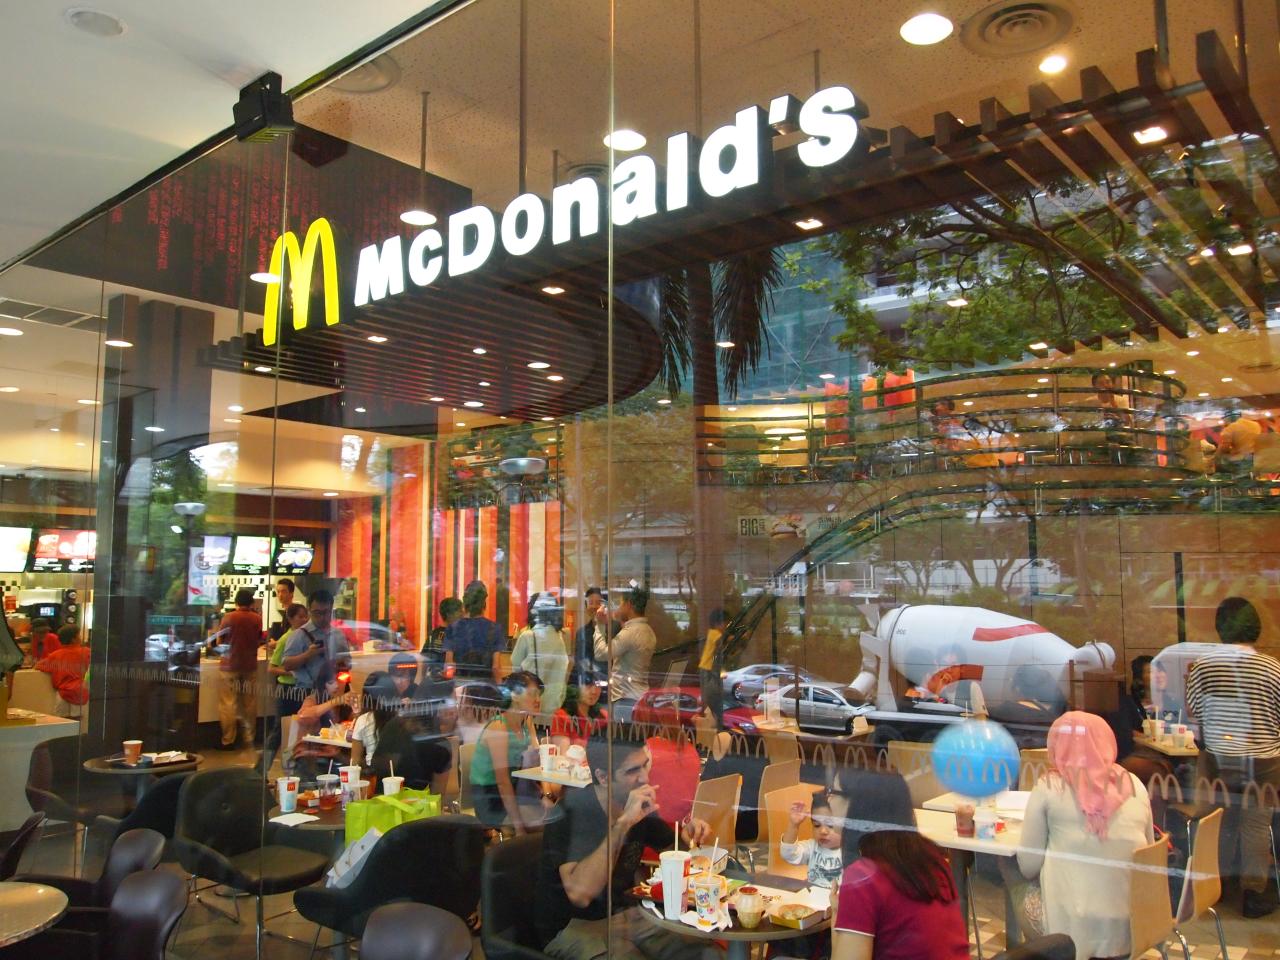 mcdonalds restaurant and cafe in an asian country